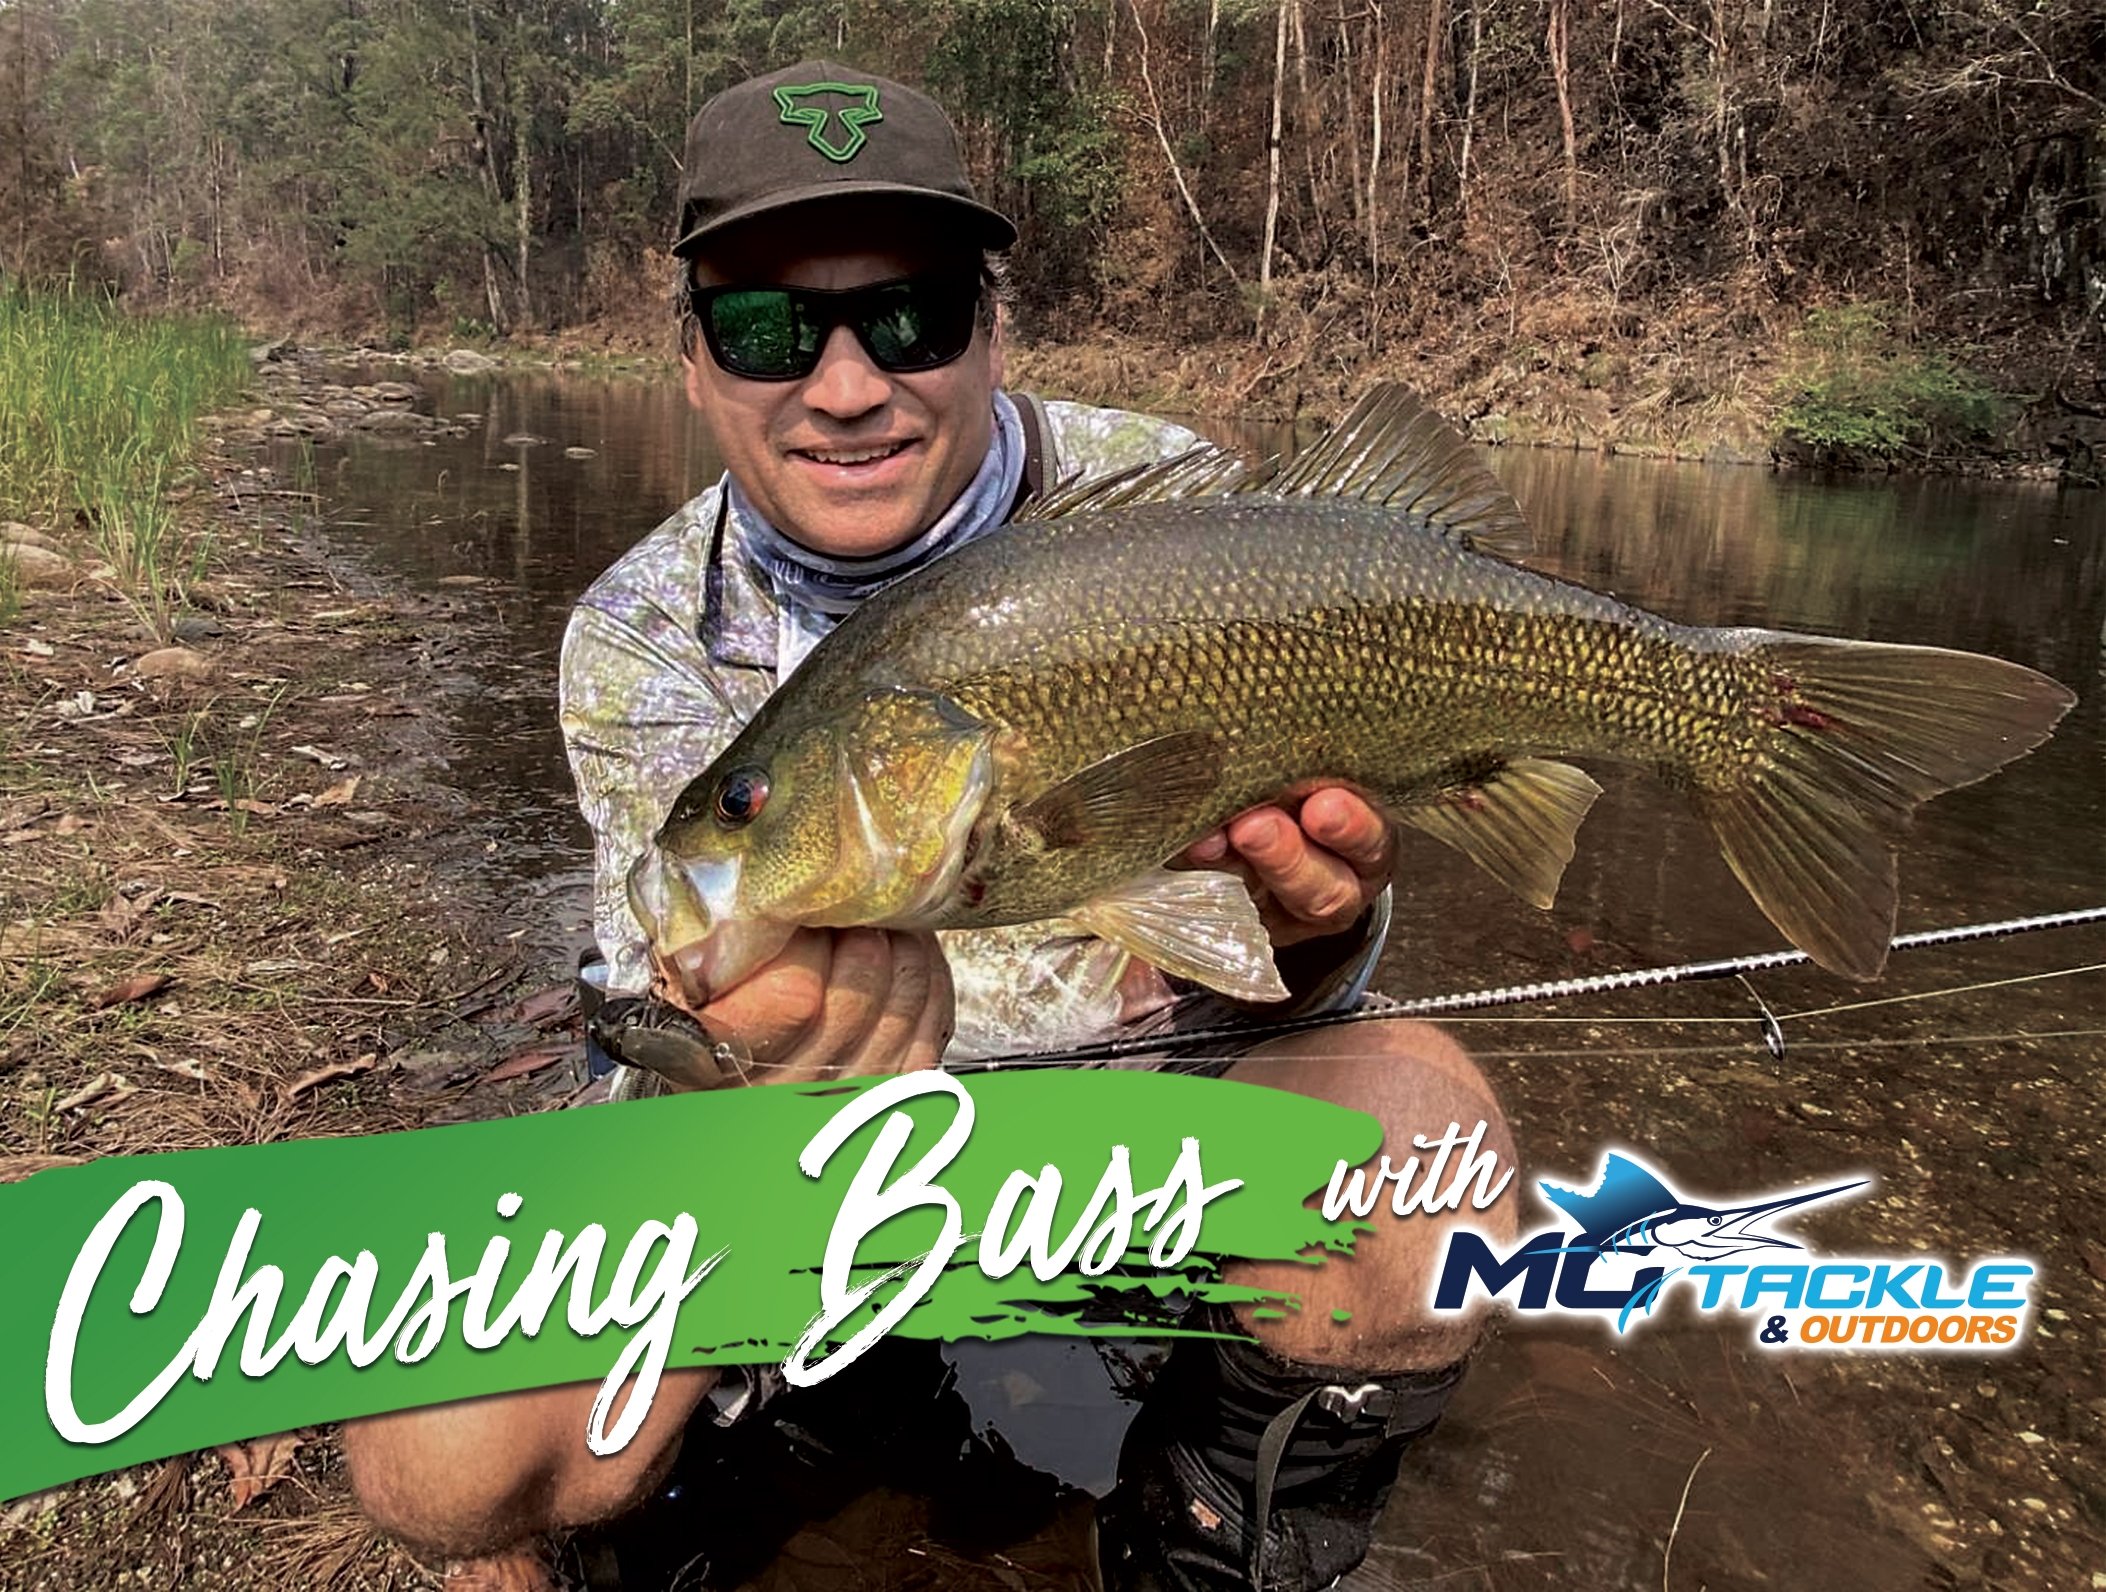 Chasing Bass With Motackle